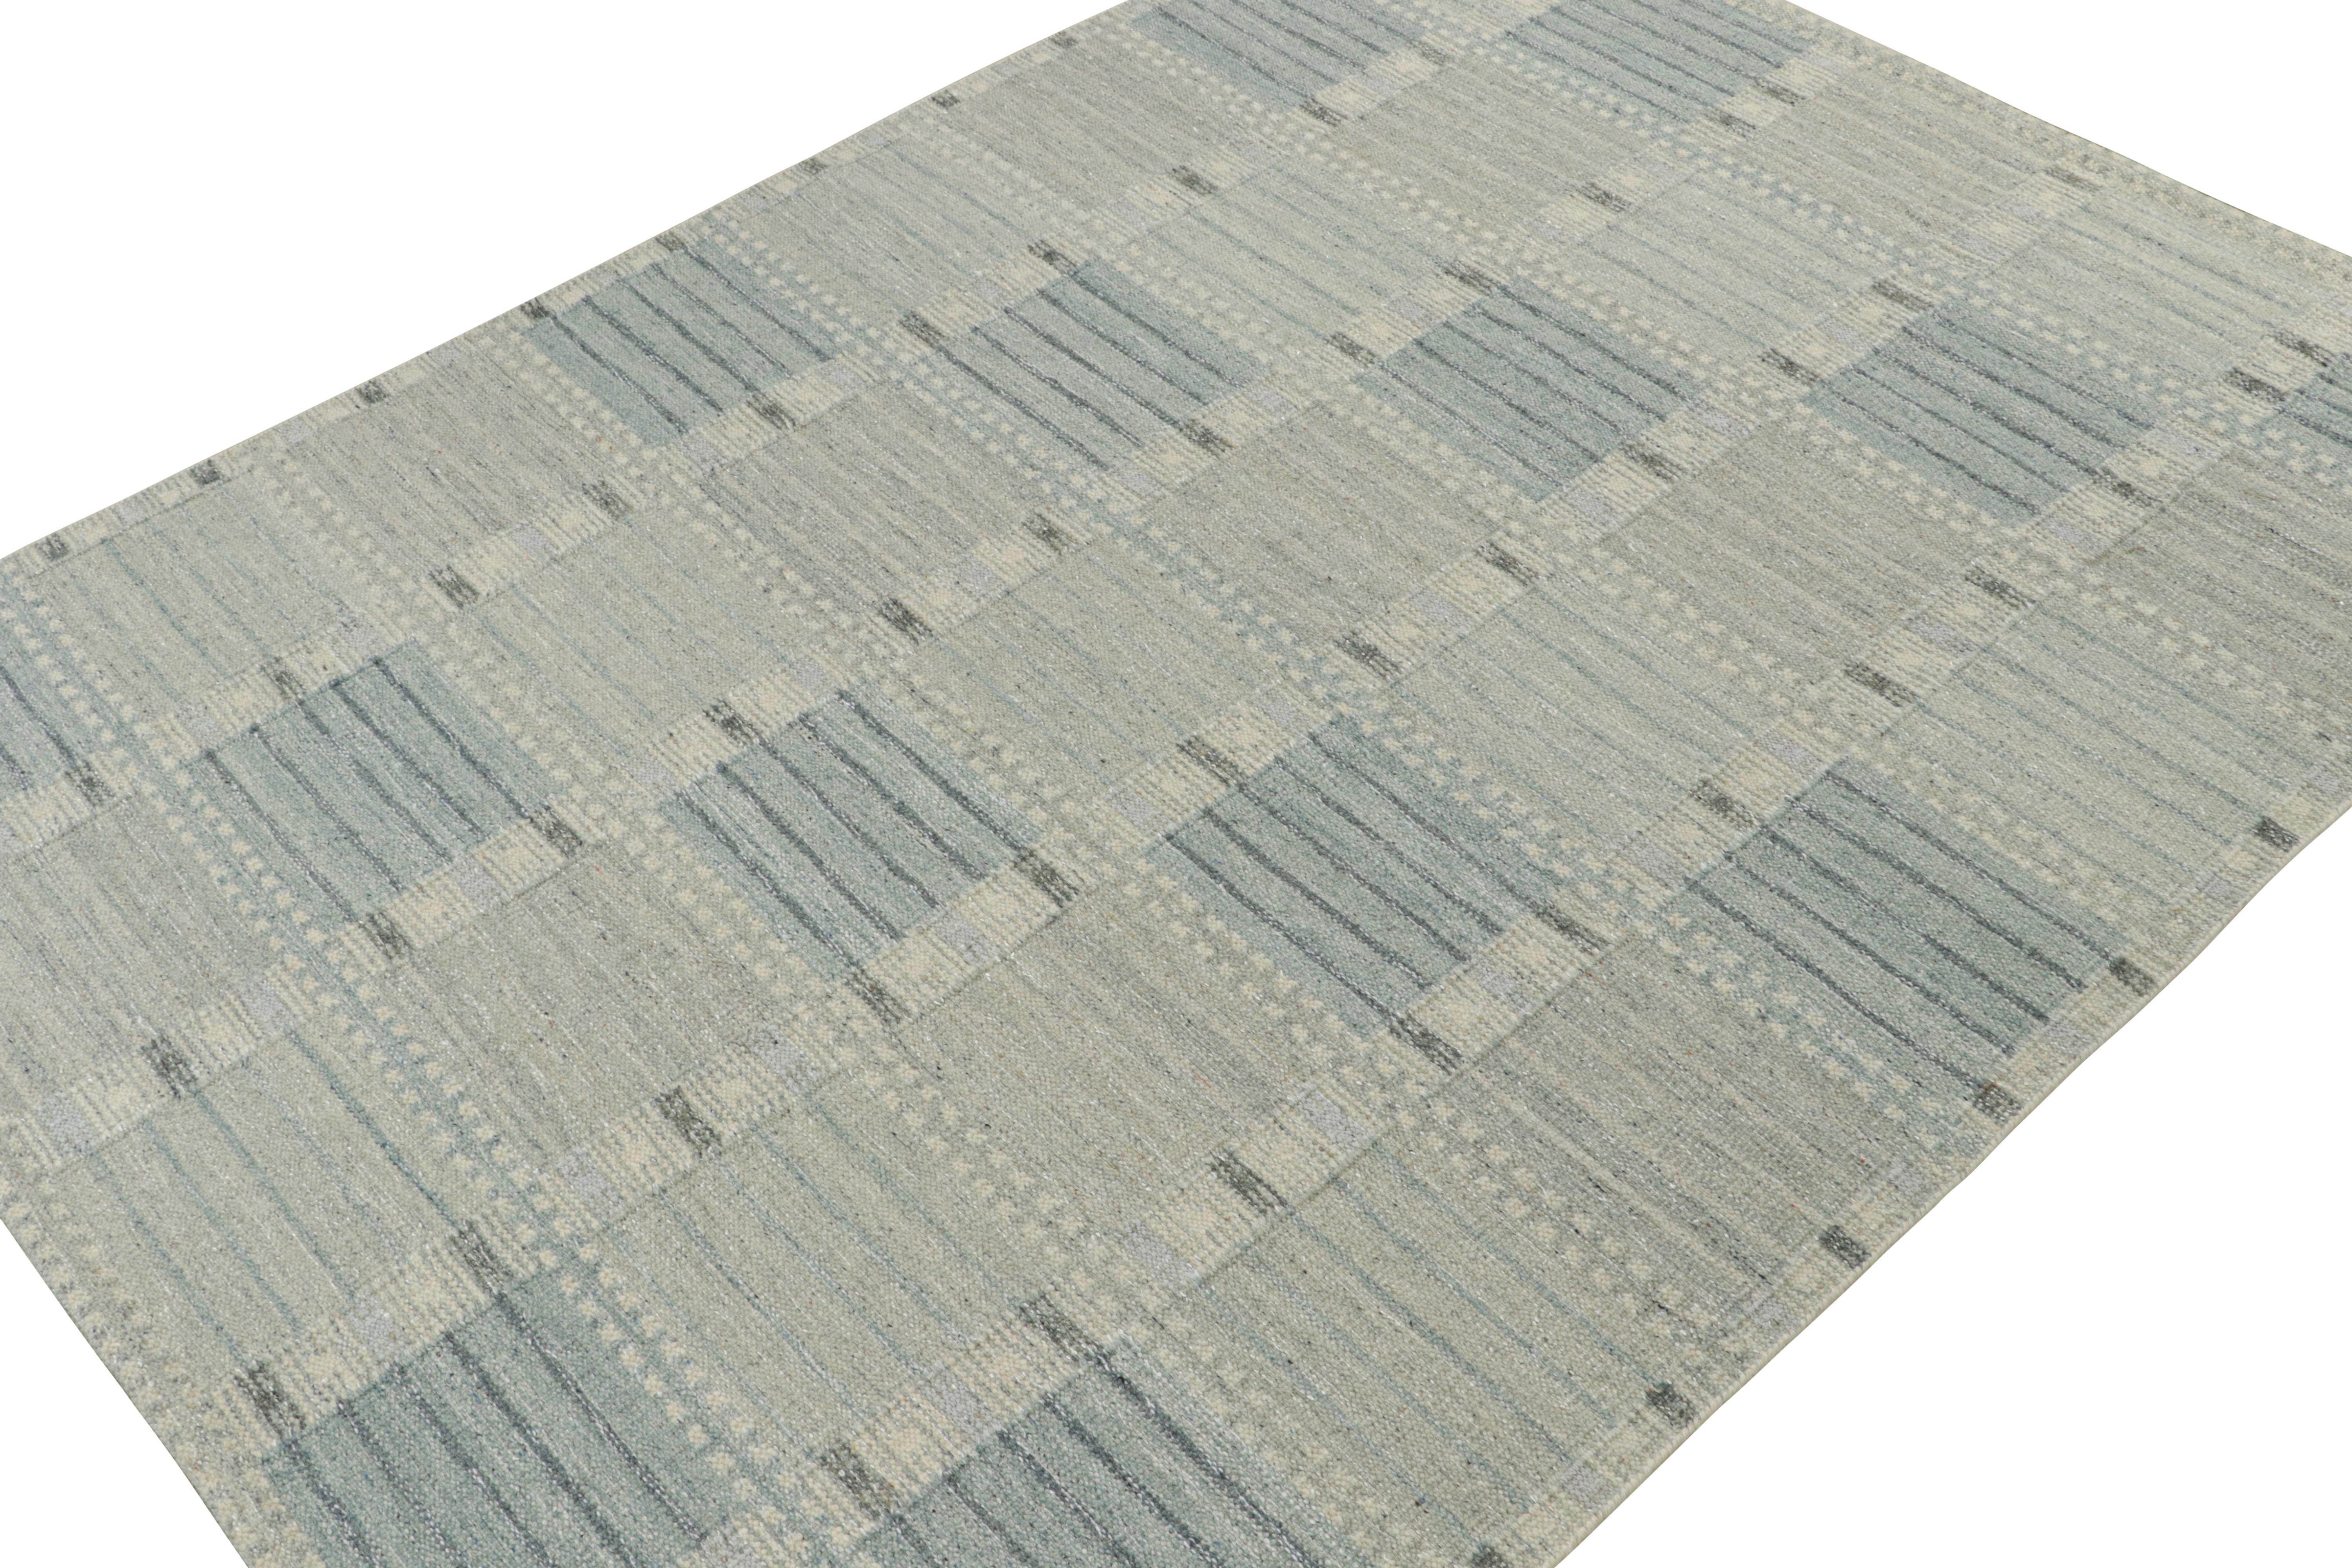 This custom flat weave design is a new addition to the Scandinavian rug collection by Rug & Kilim. Handwoven in wool, cotton and natural yarns, its design reflects a contemporary take on mid-century Rollakans and Swedish Deco style.

On the